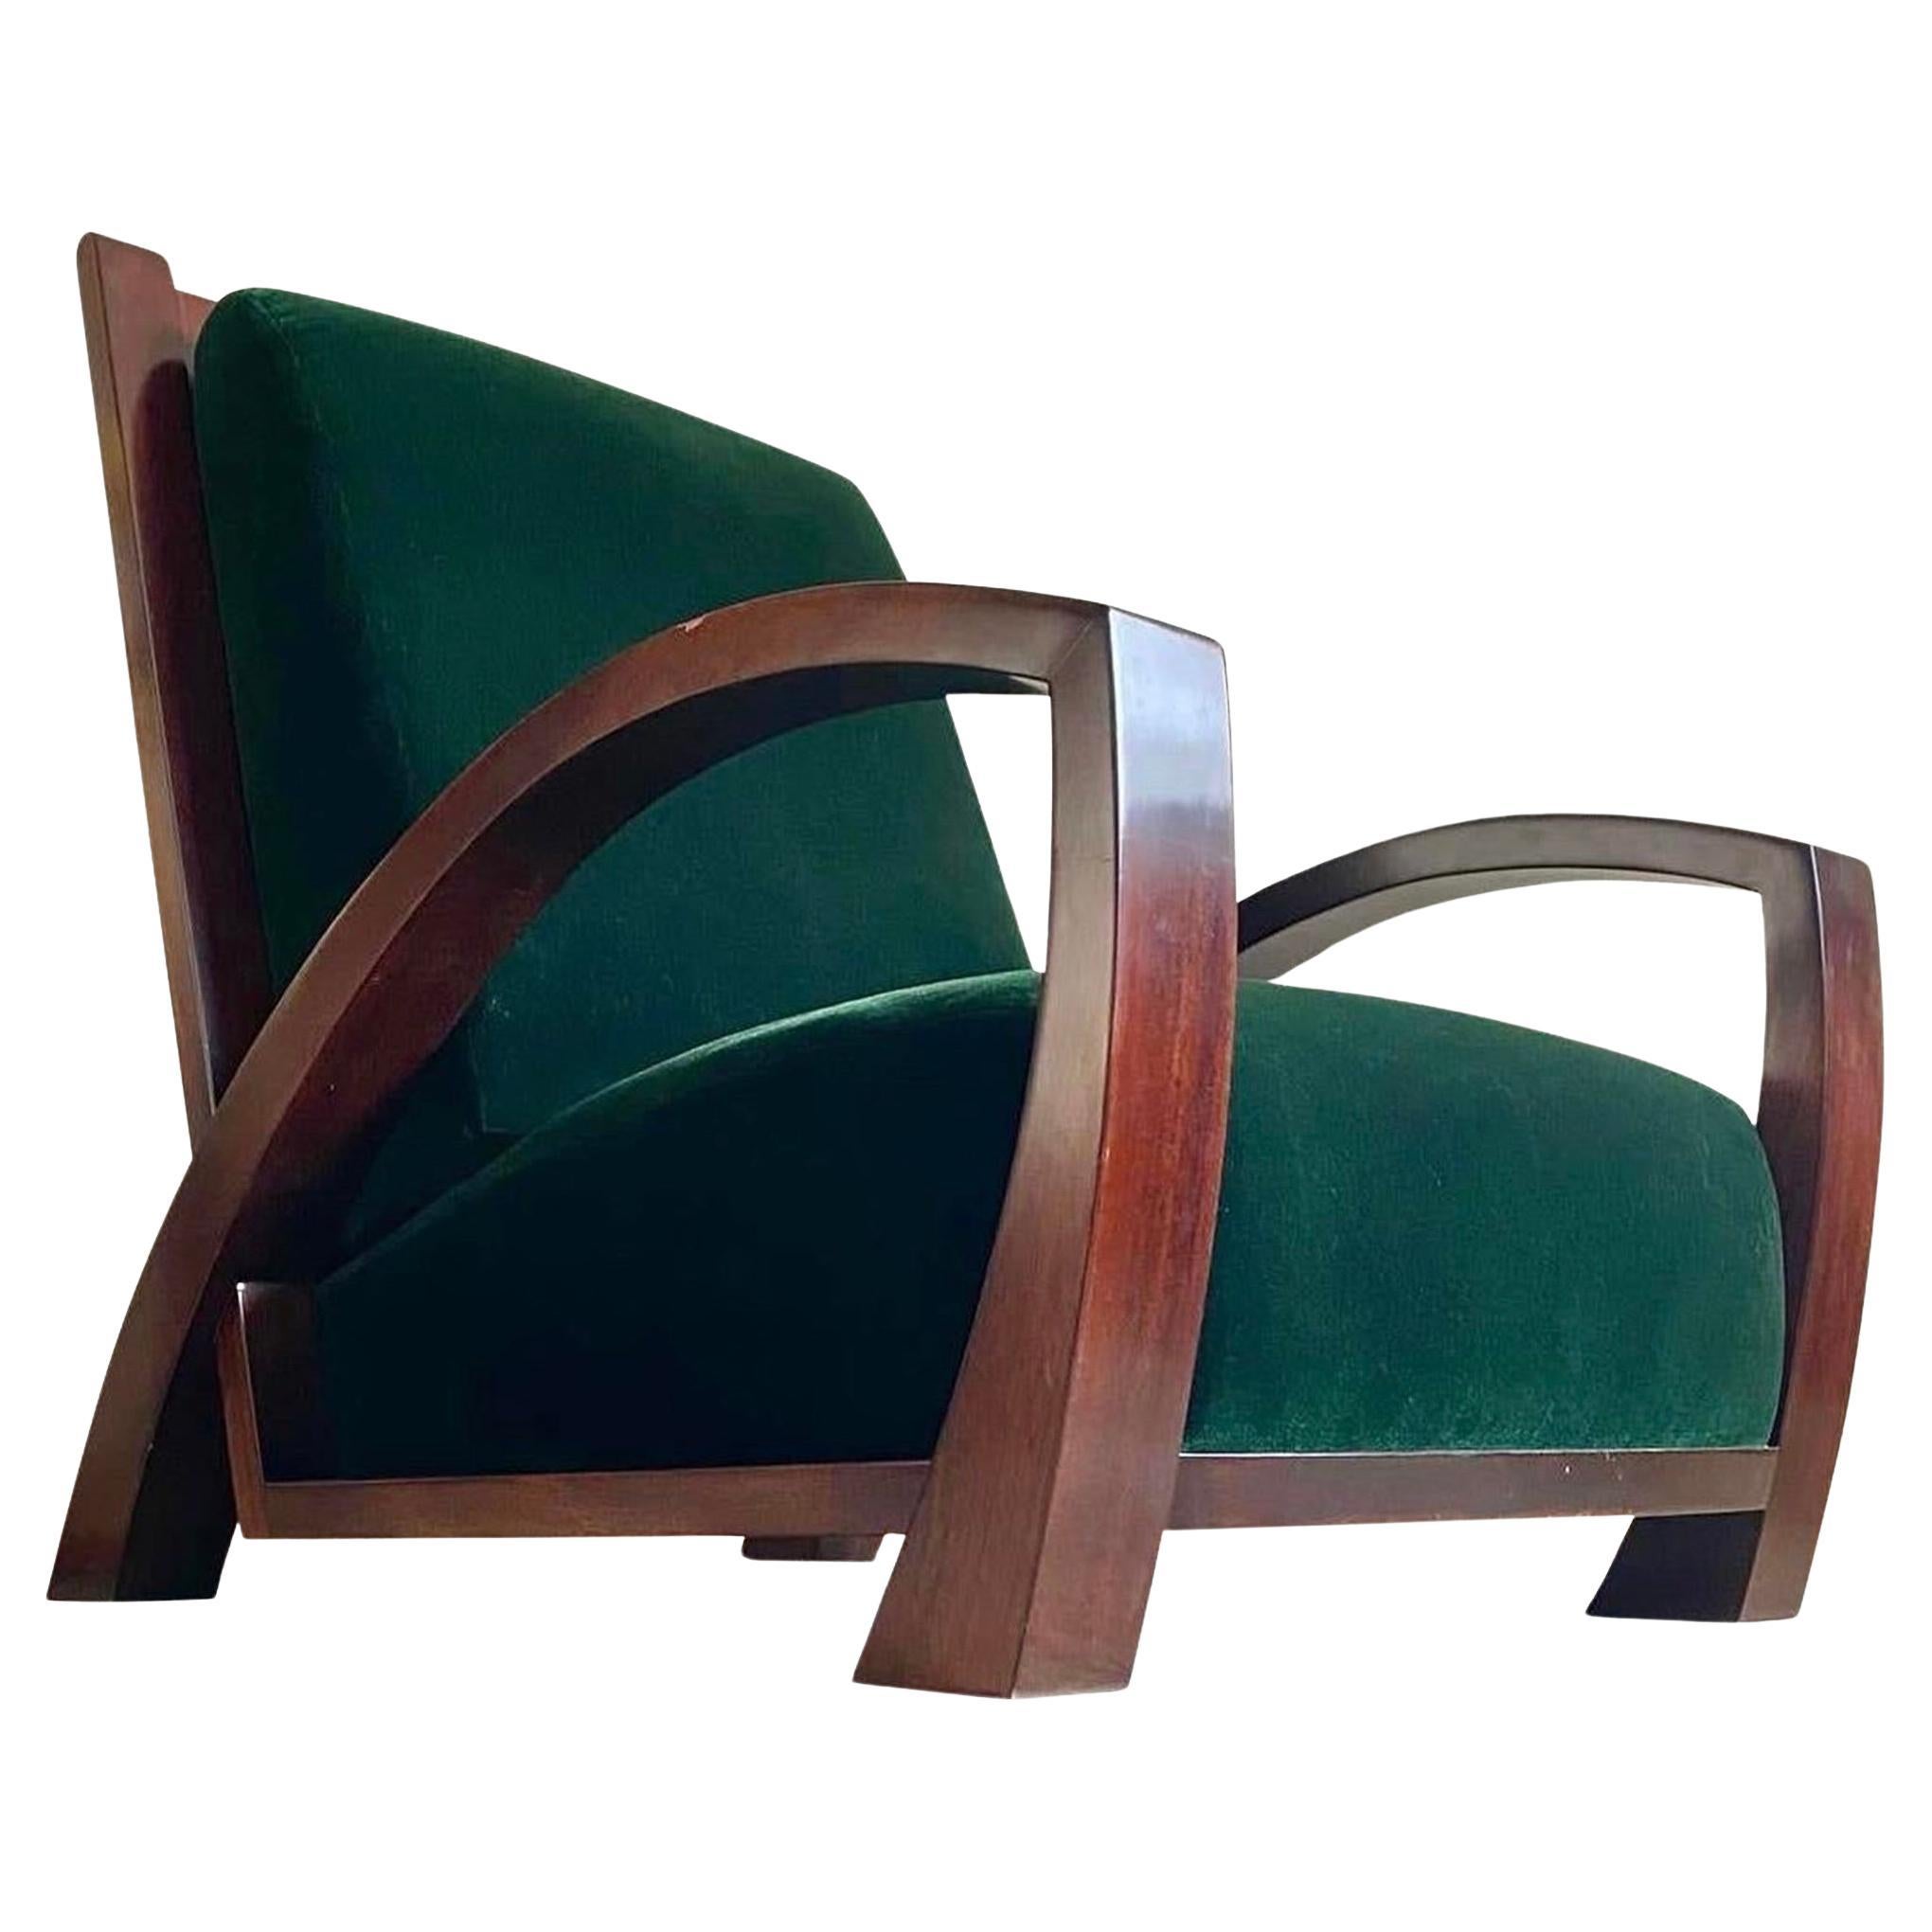 “Antibes” Mahogany Lounge Chair (A. Soudavar for Mirak) in Forest Green Mohair For Sale